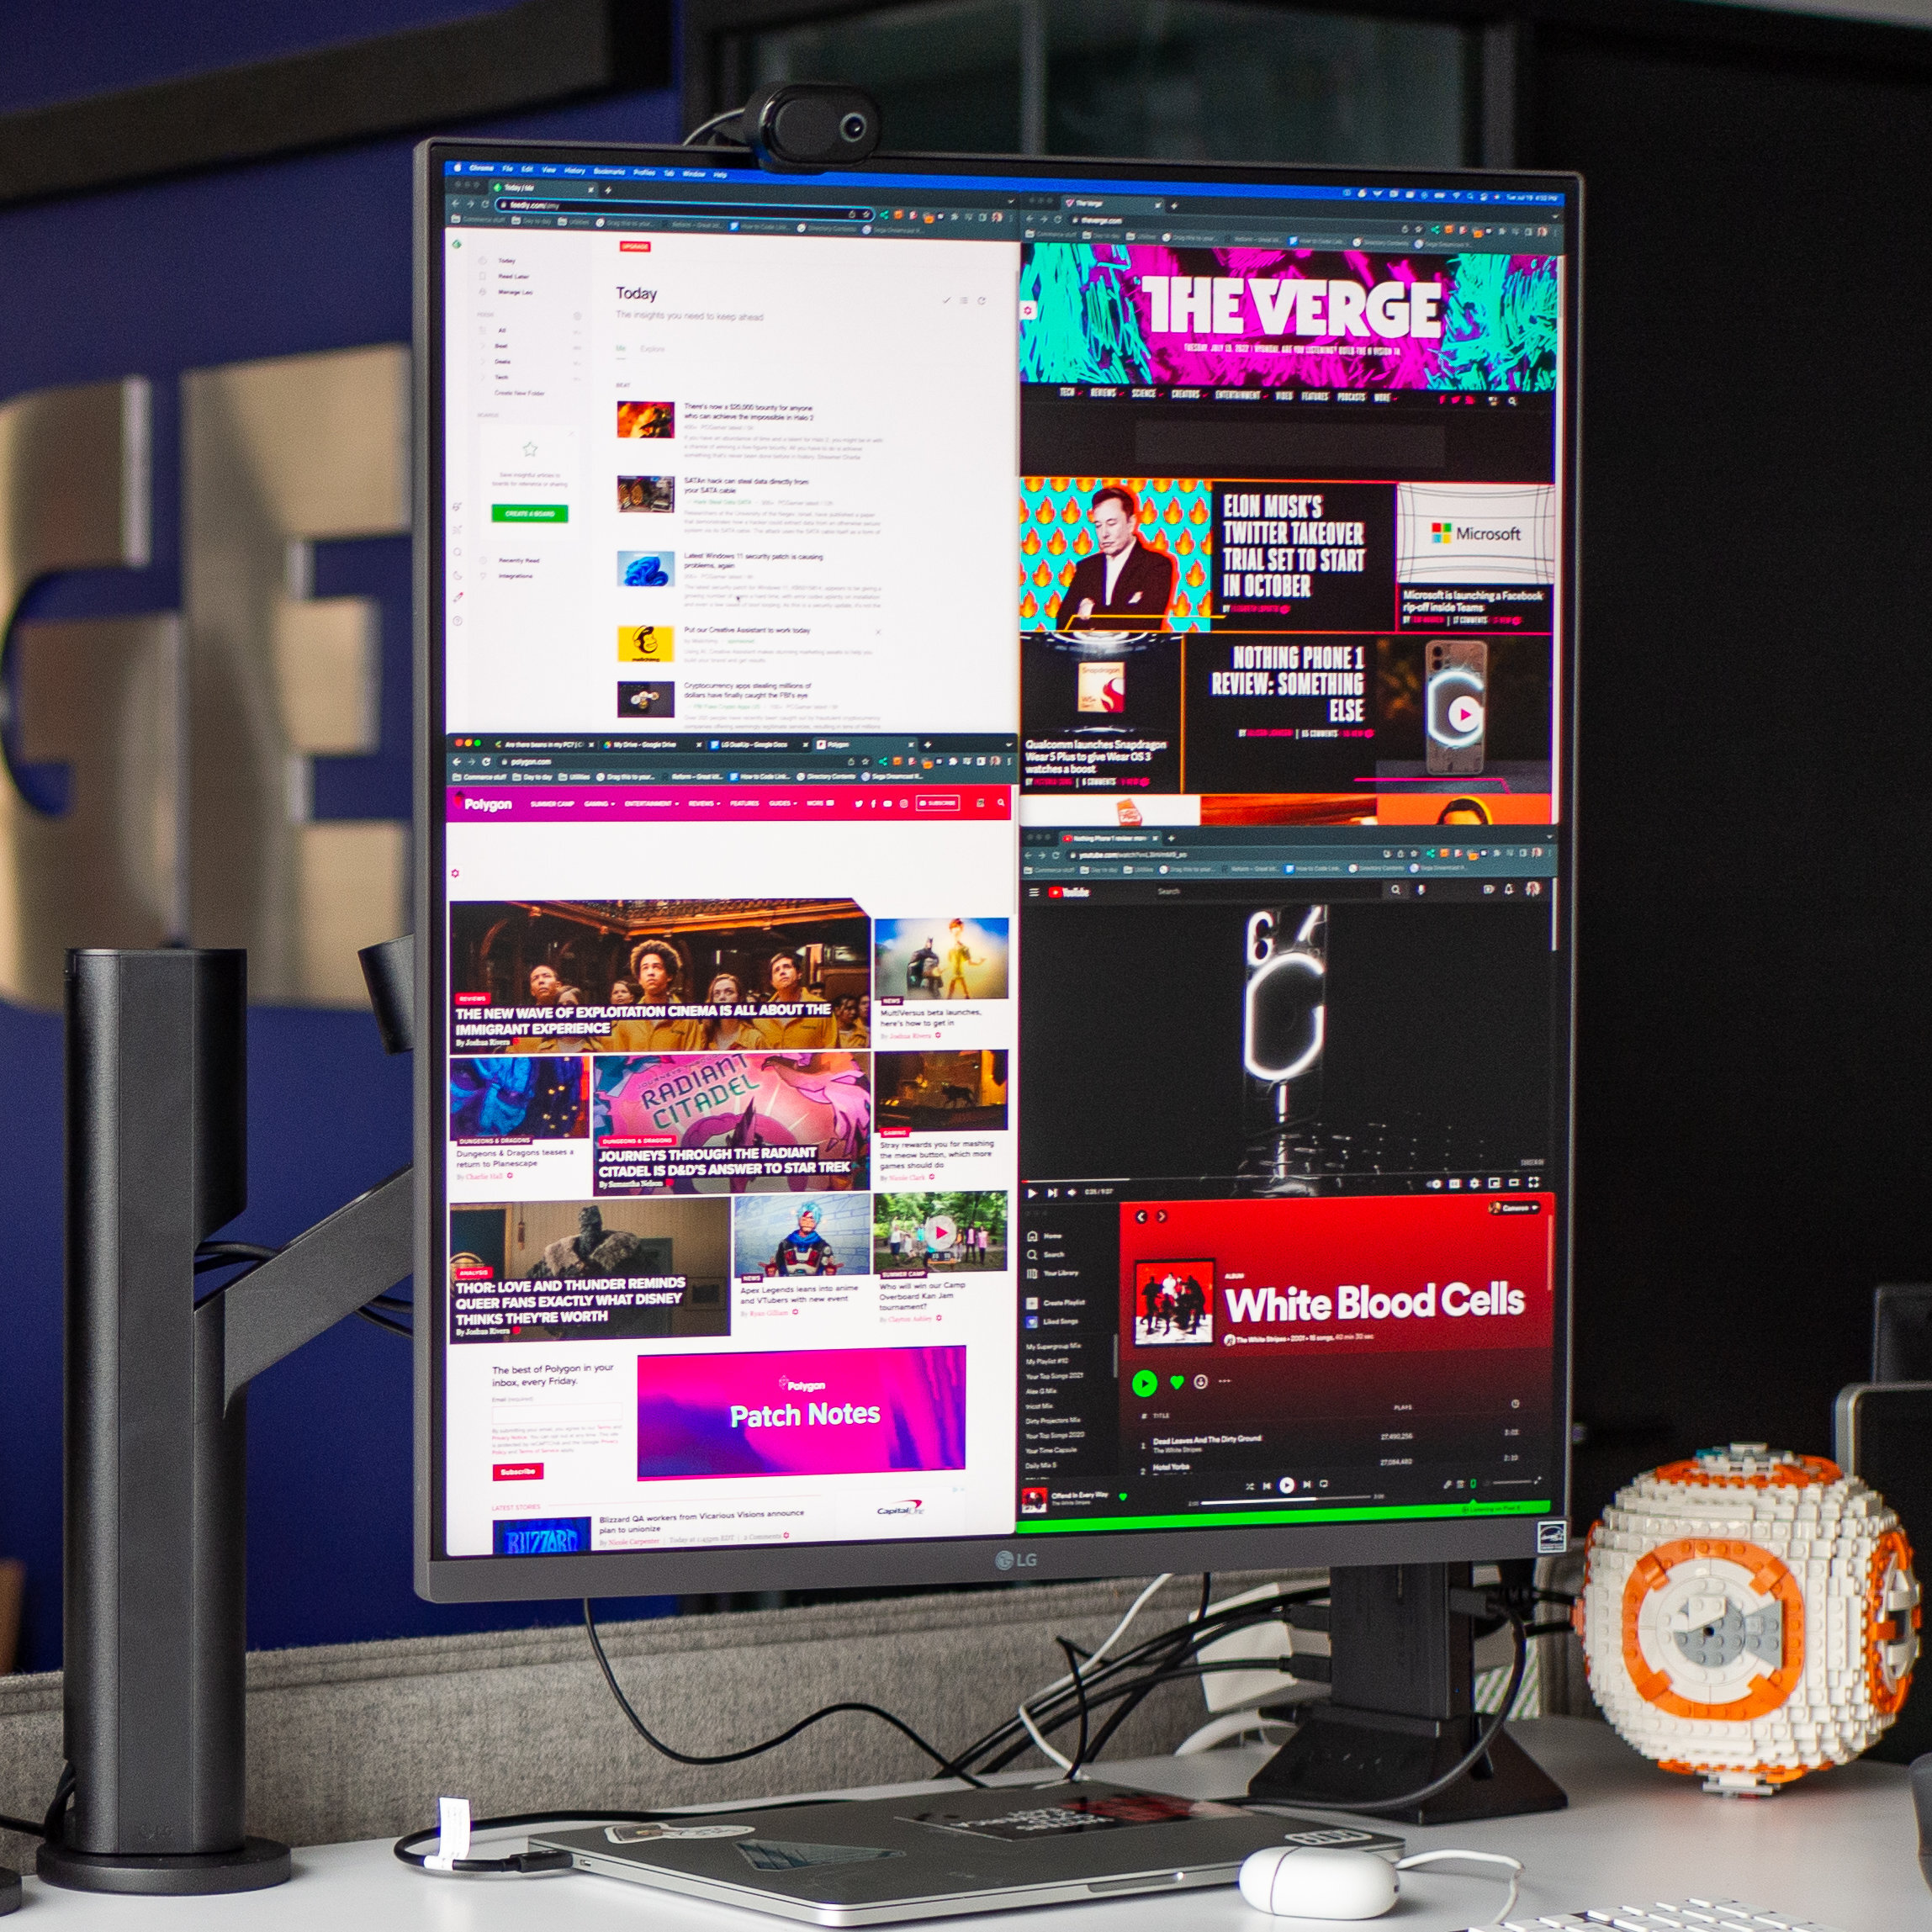 Lg dualup review a tall expensive monitor focused on efficiency